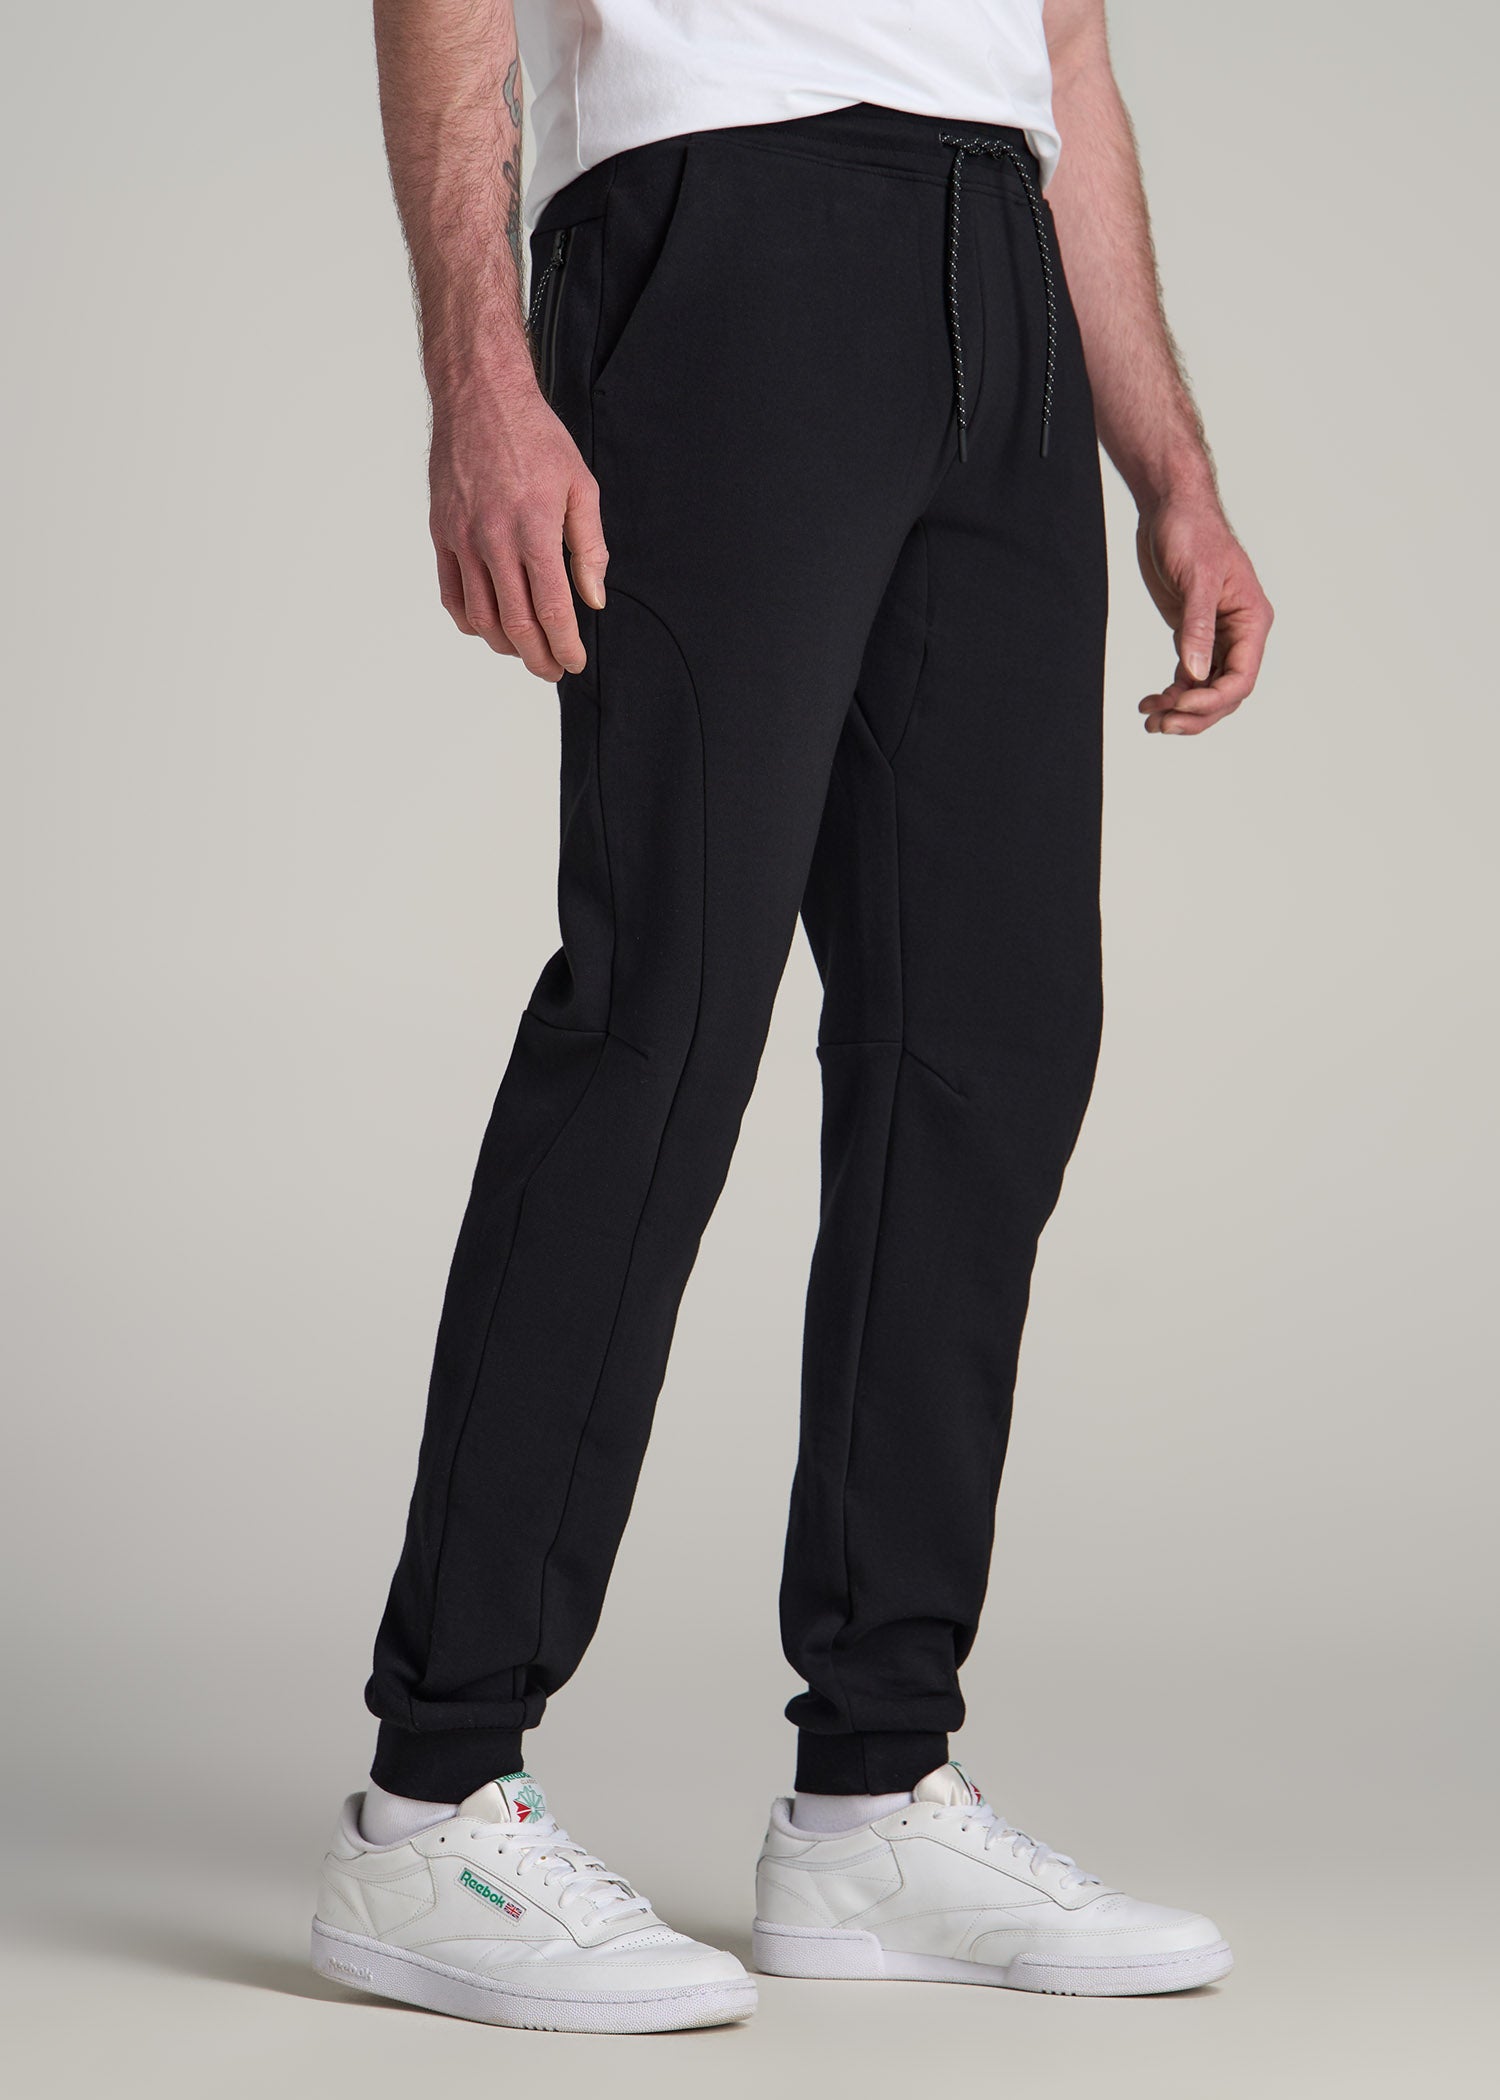 Utility Joggers for Tall Men